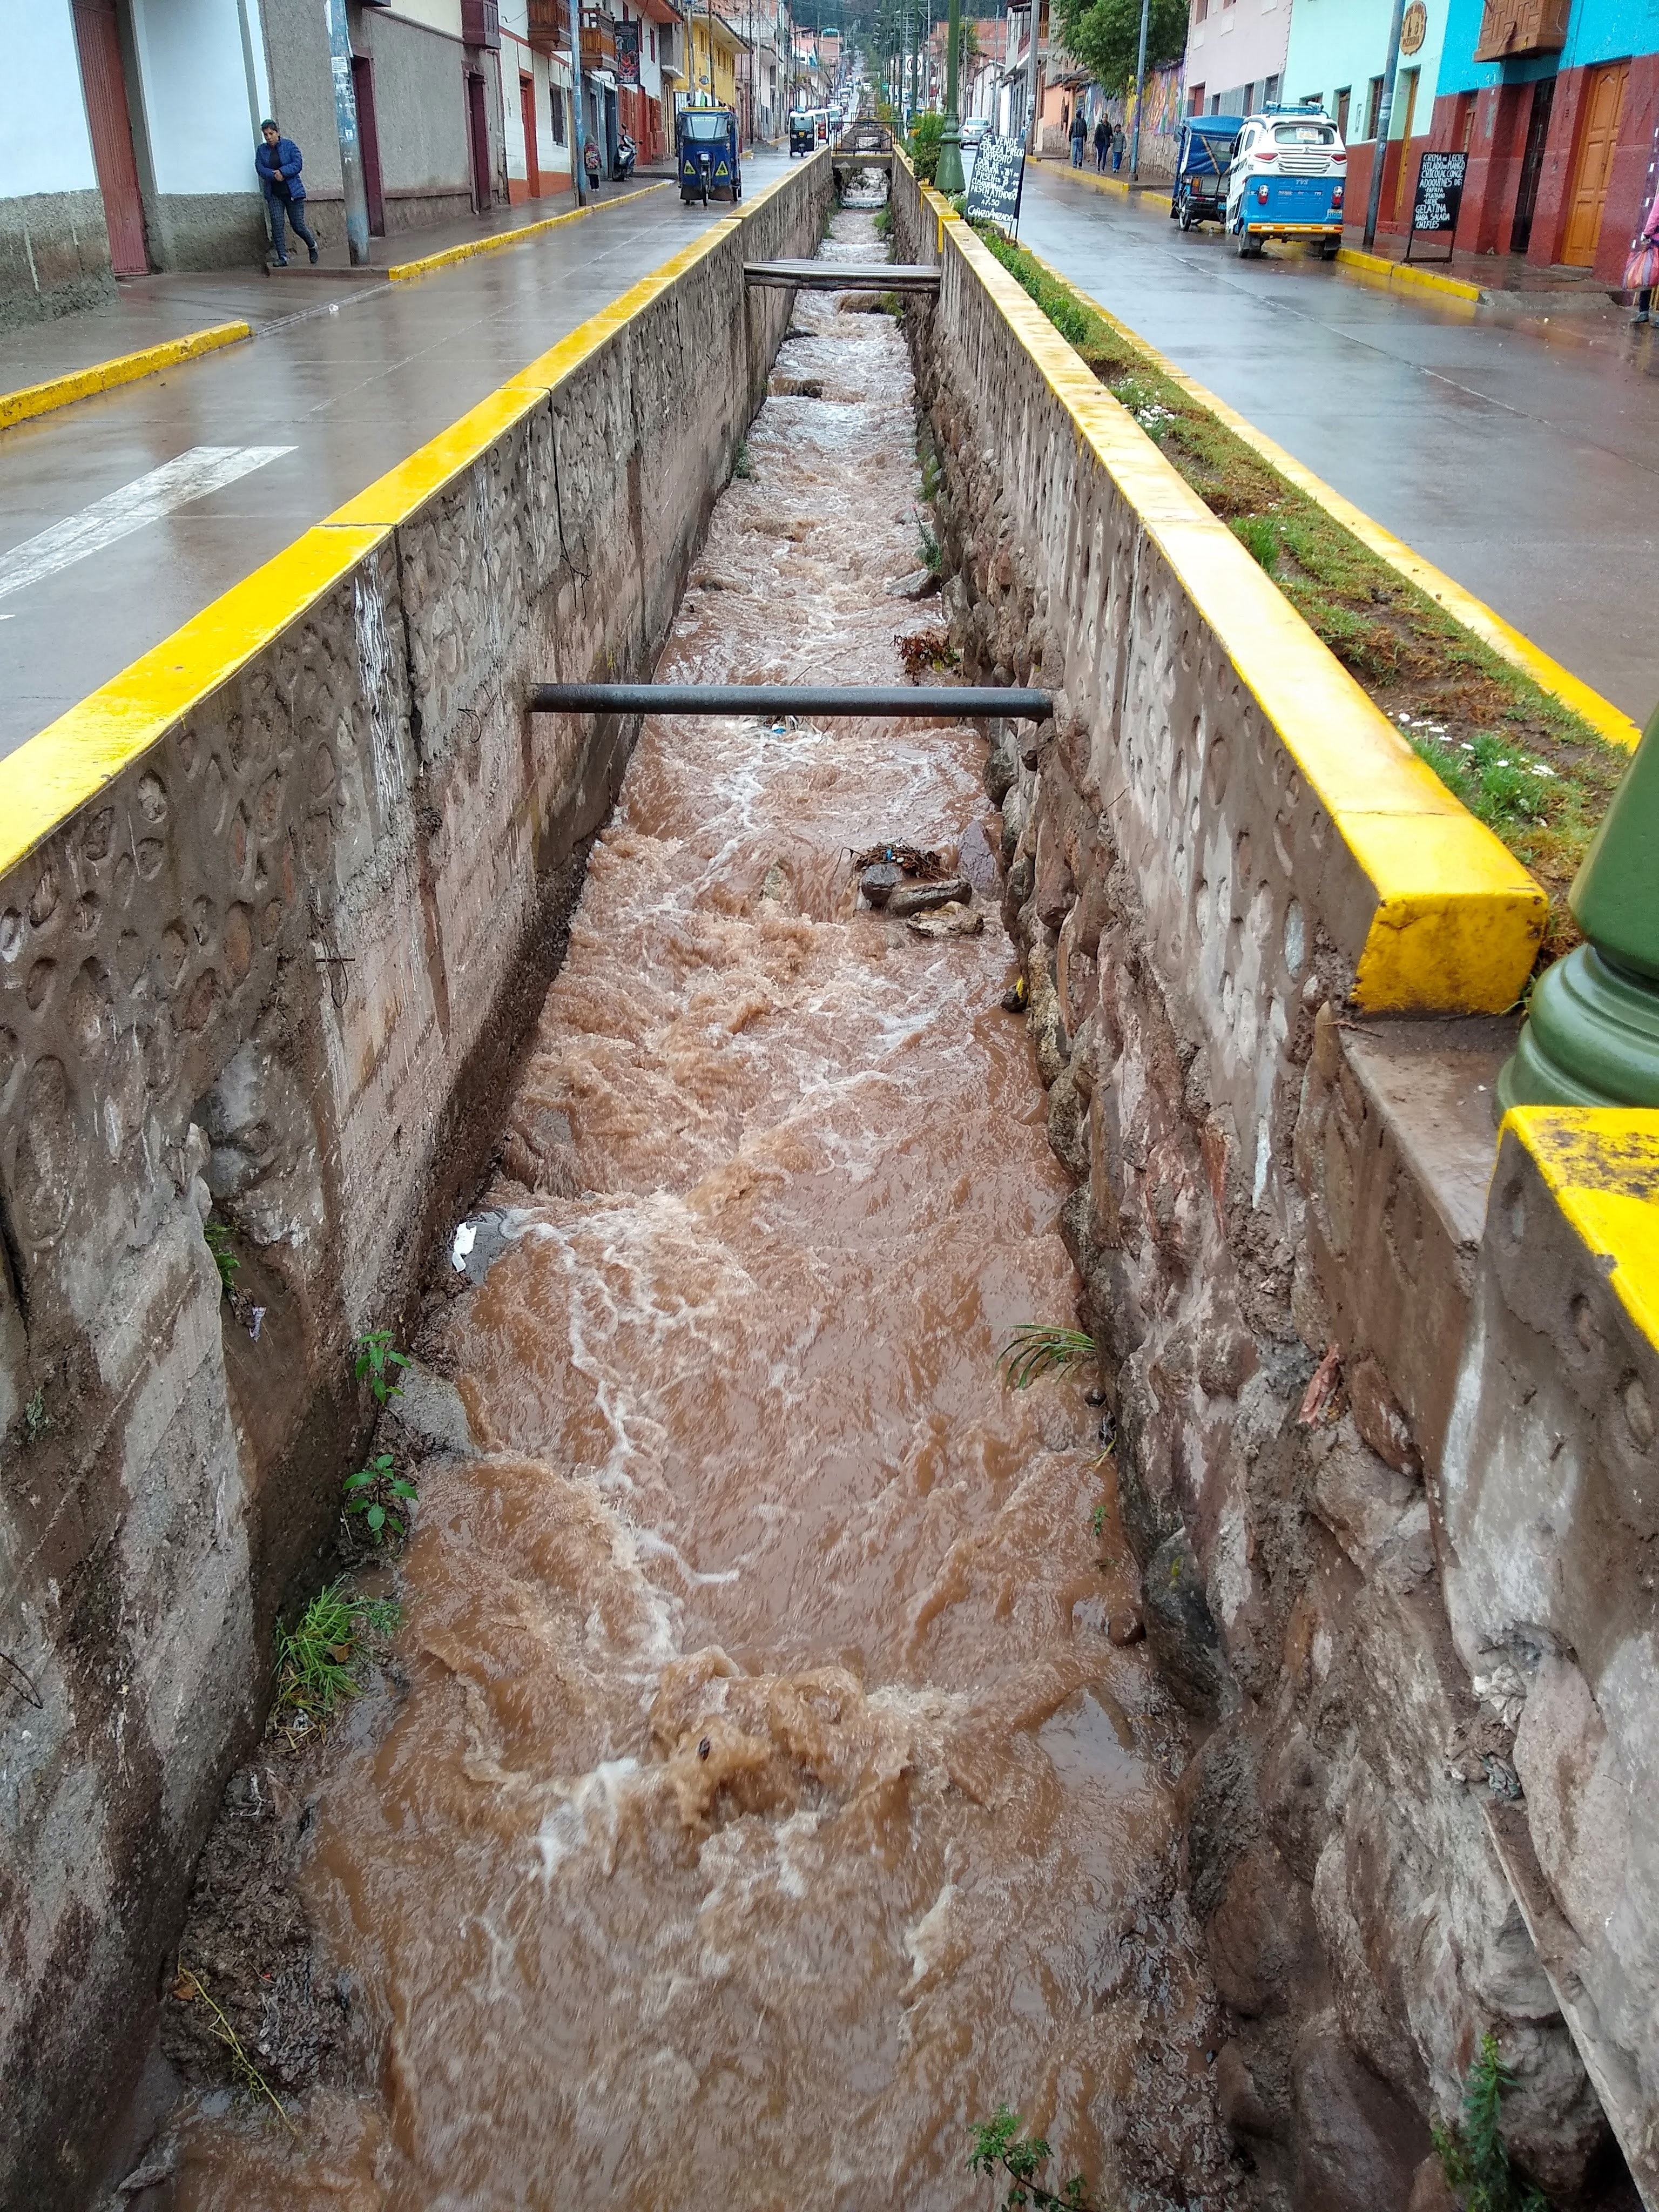 High volume of water flowing down the central drainage canal.